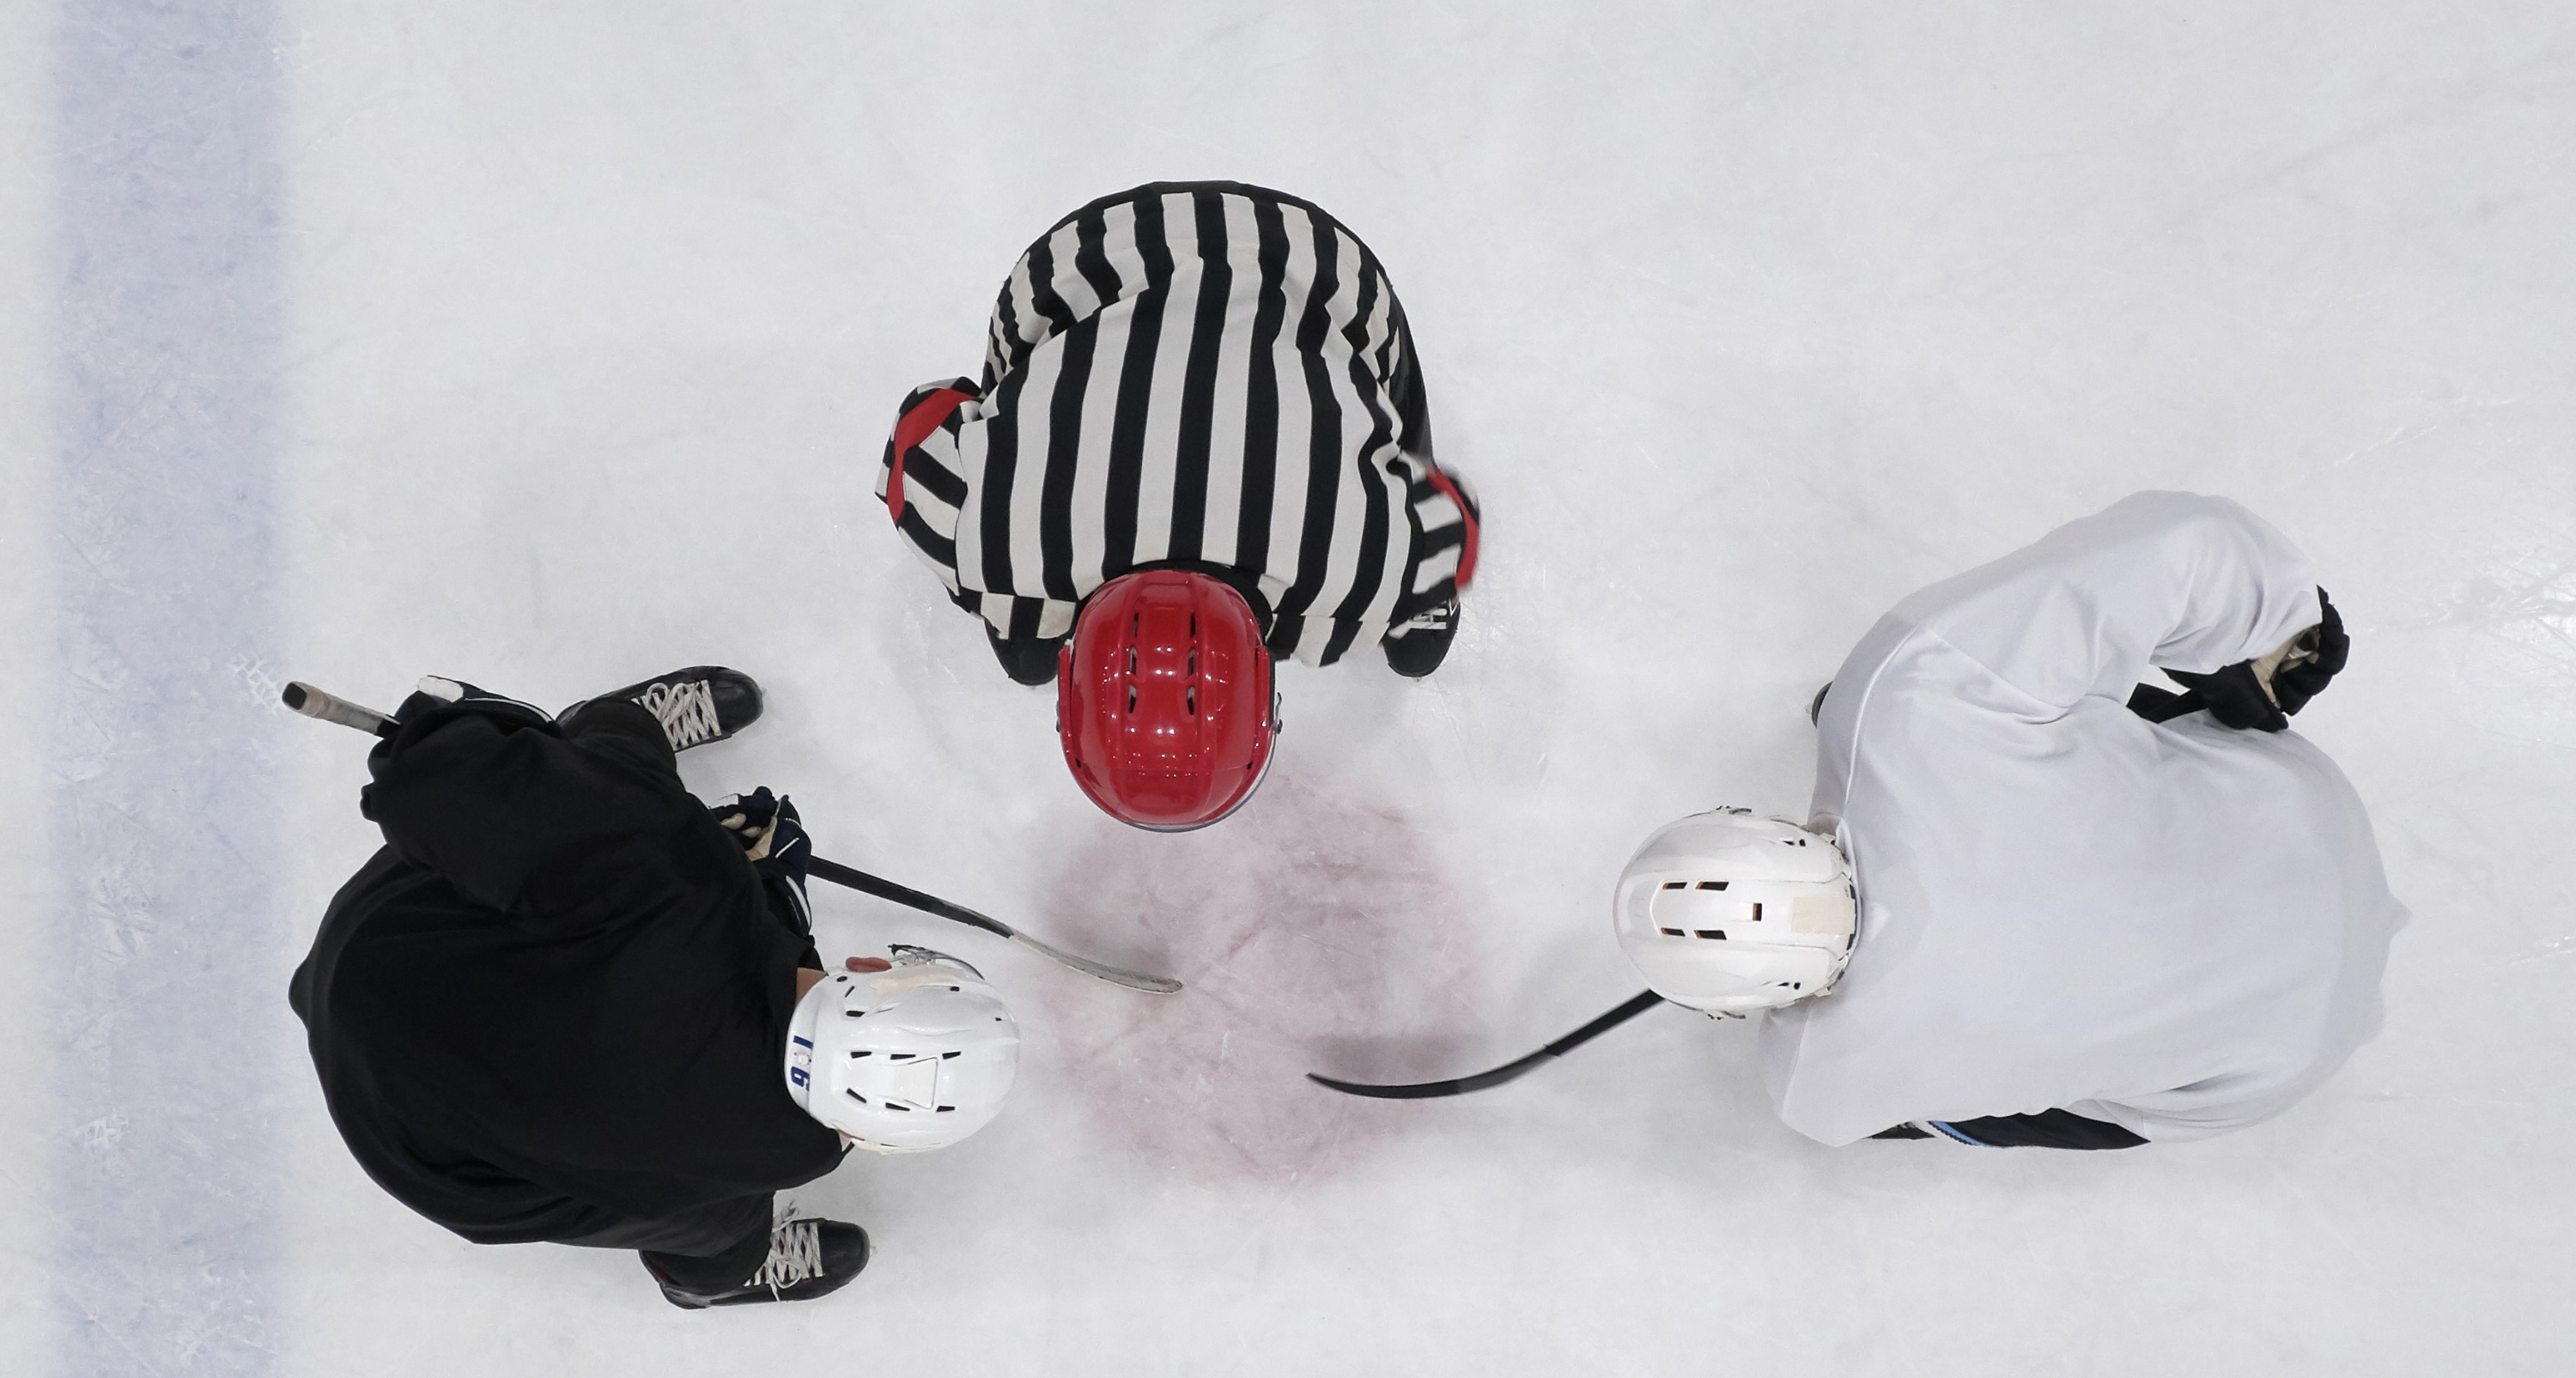 Hockey face off from above - illustrating and adversarial relationship that can happen between employer and employee during suits